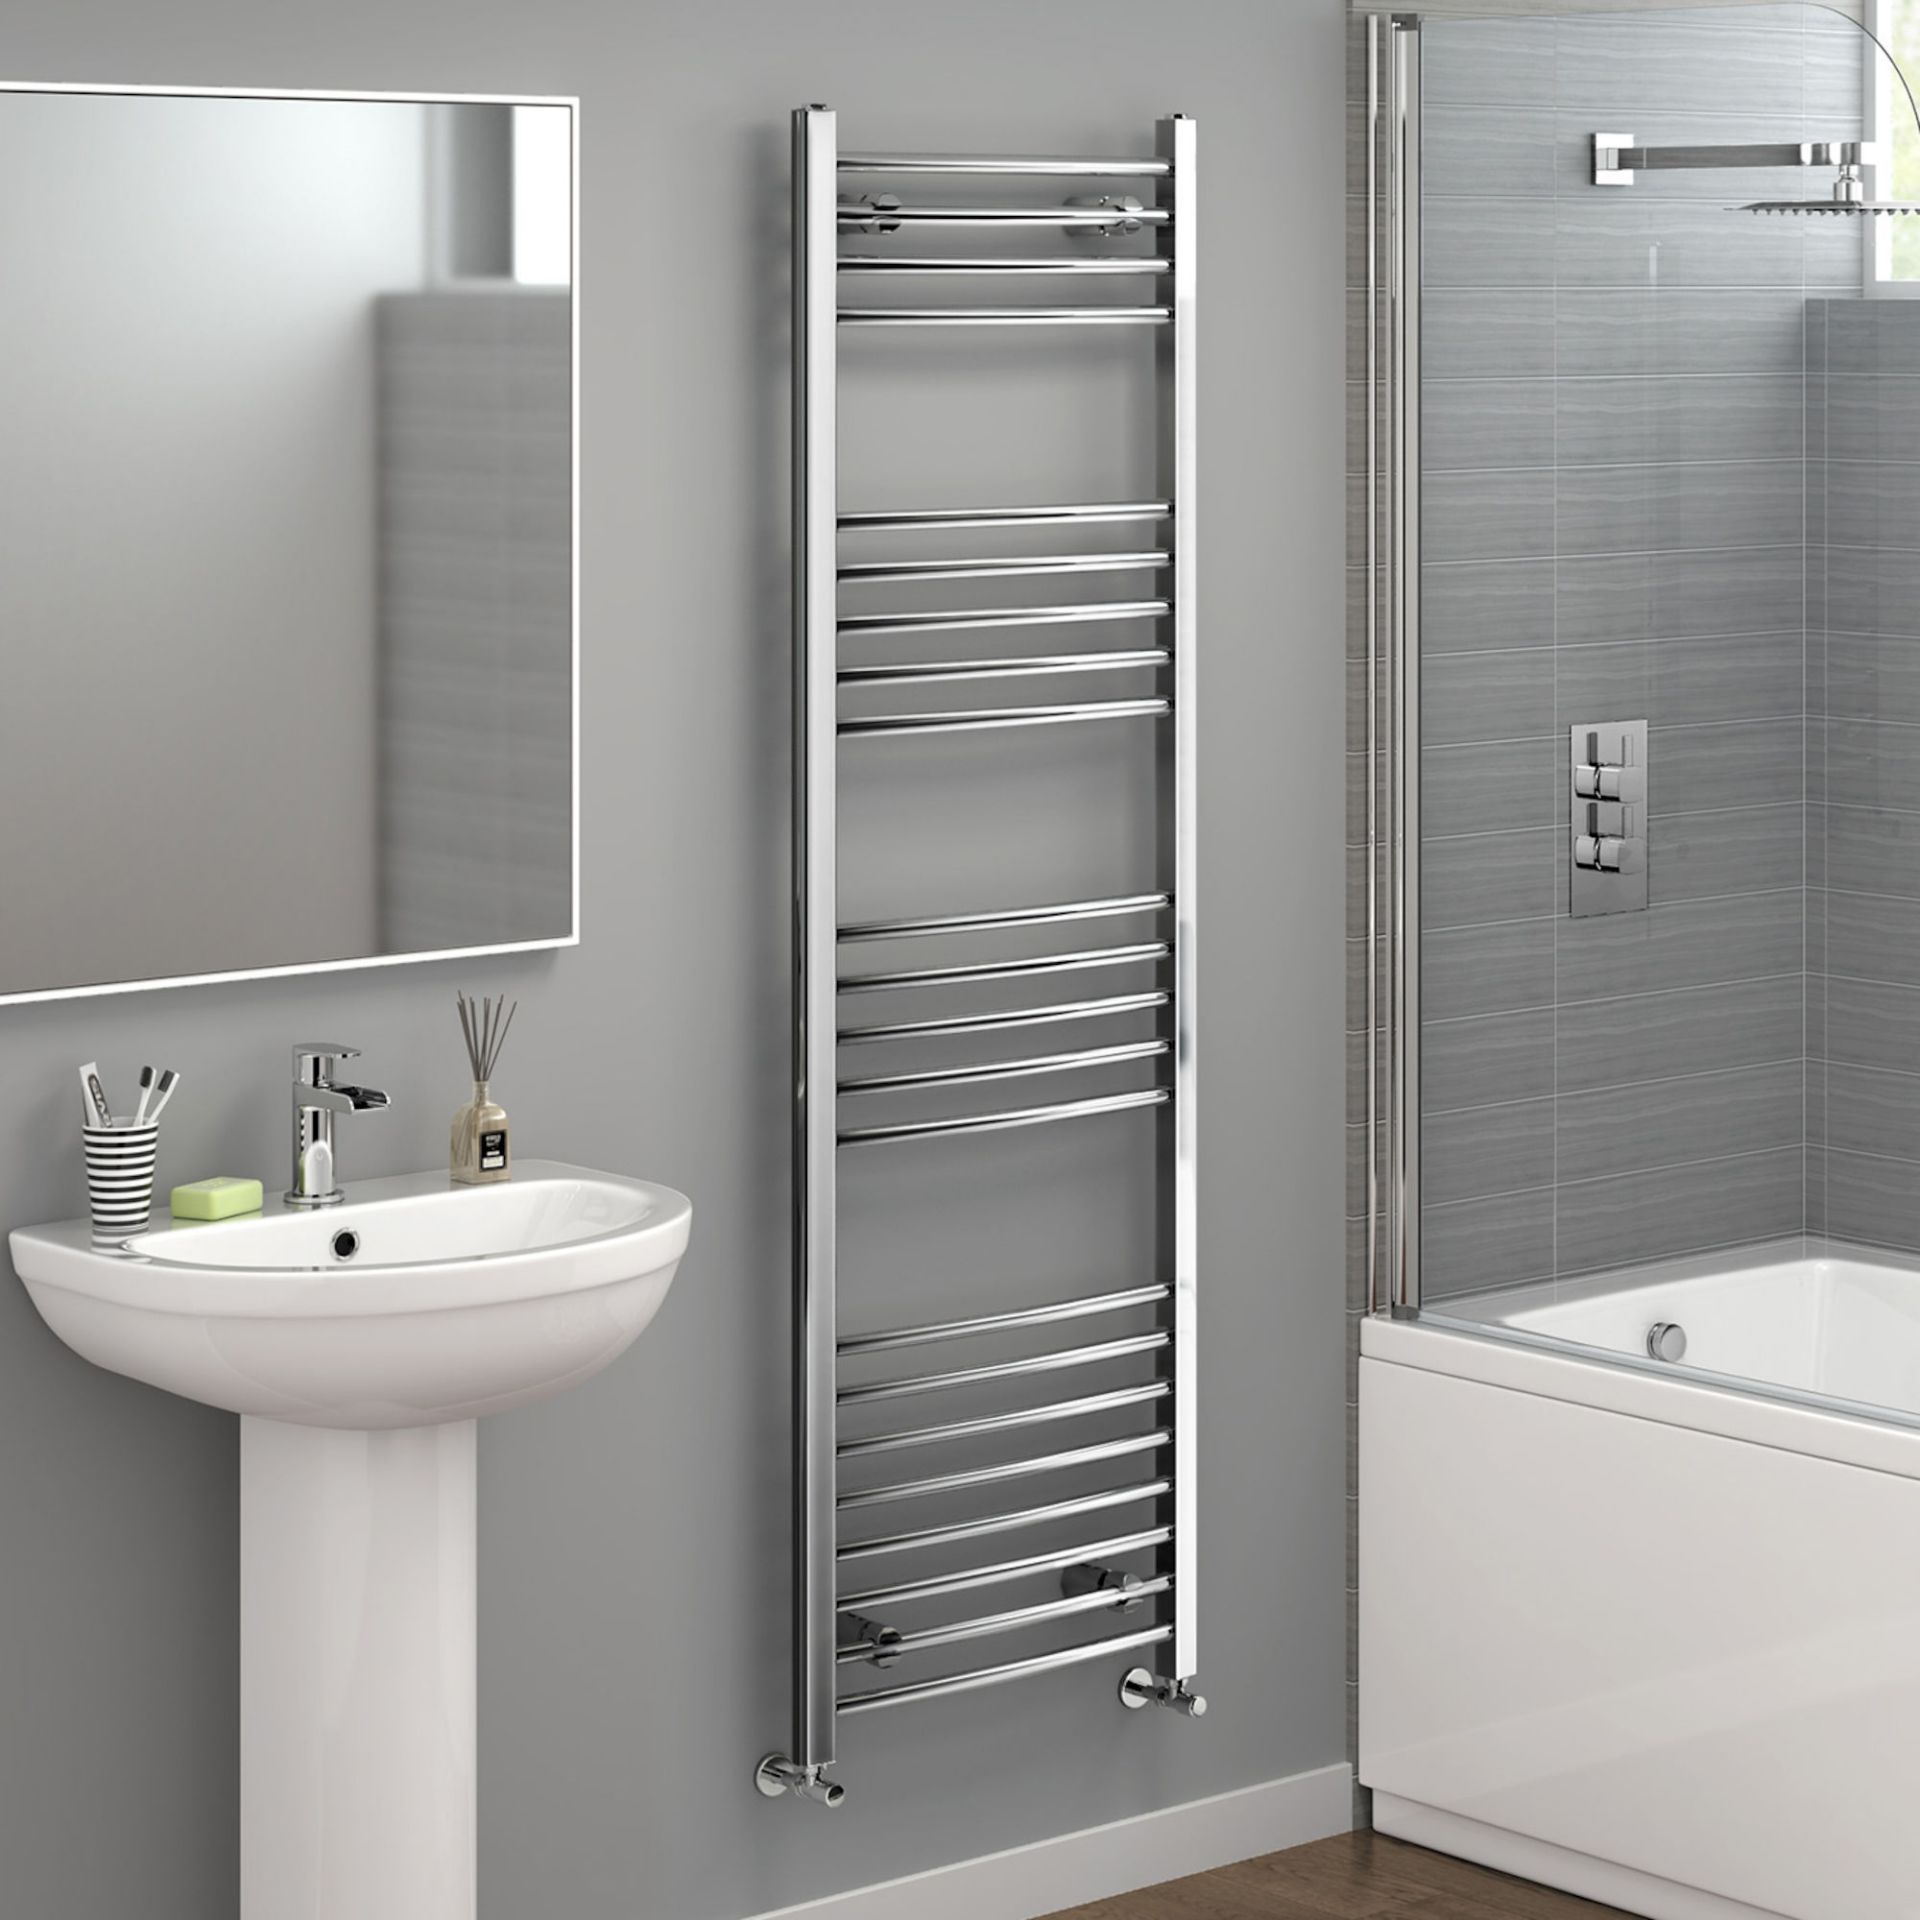 (DK14) 1600x500mm - 20mm Tubes - Chrome Curved Rail Ladder Towel Radiator. Made from chrome plated